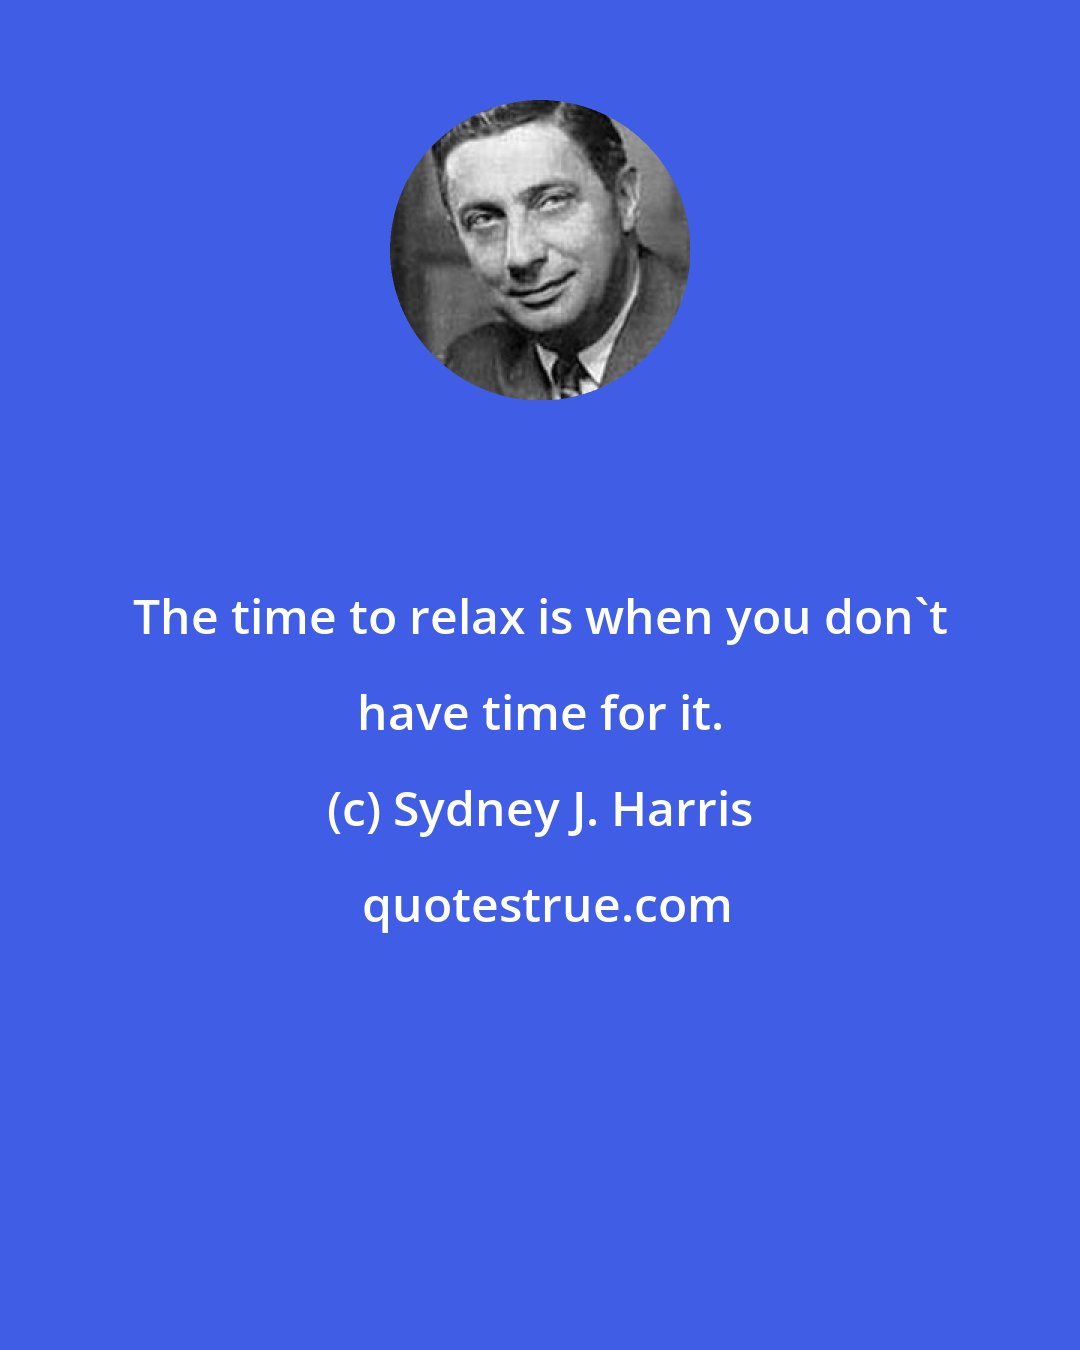 Sydney J. Harris: The time to relax is when you don't have time for it.